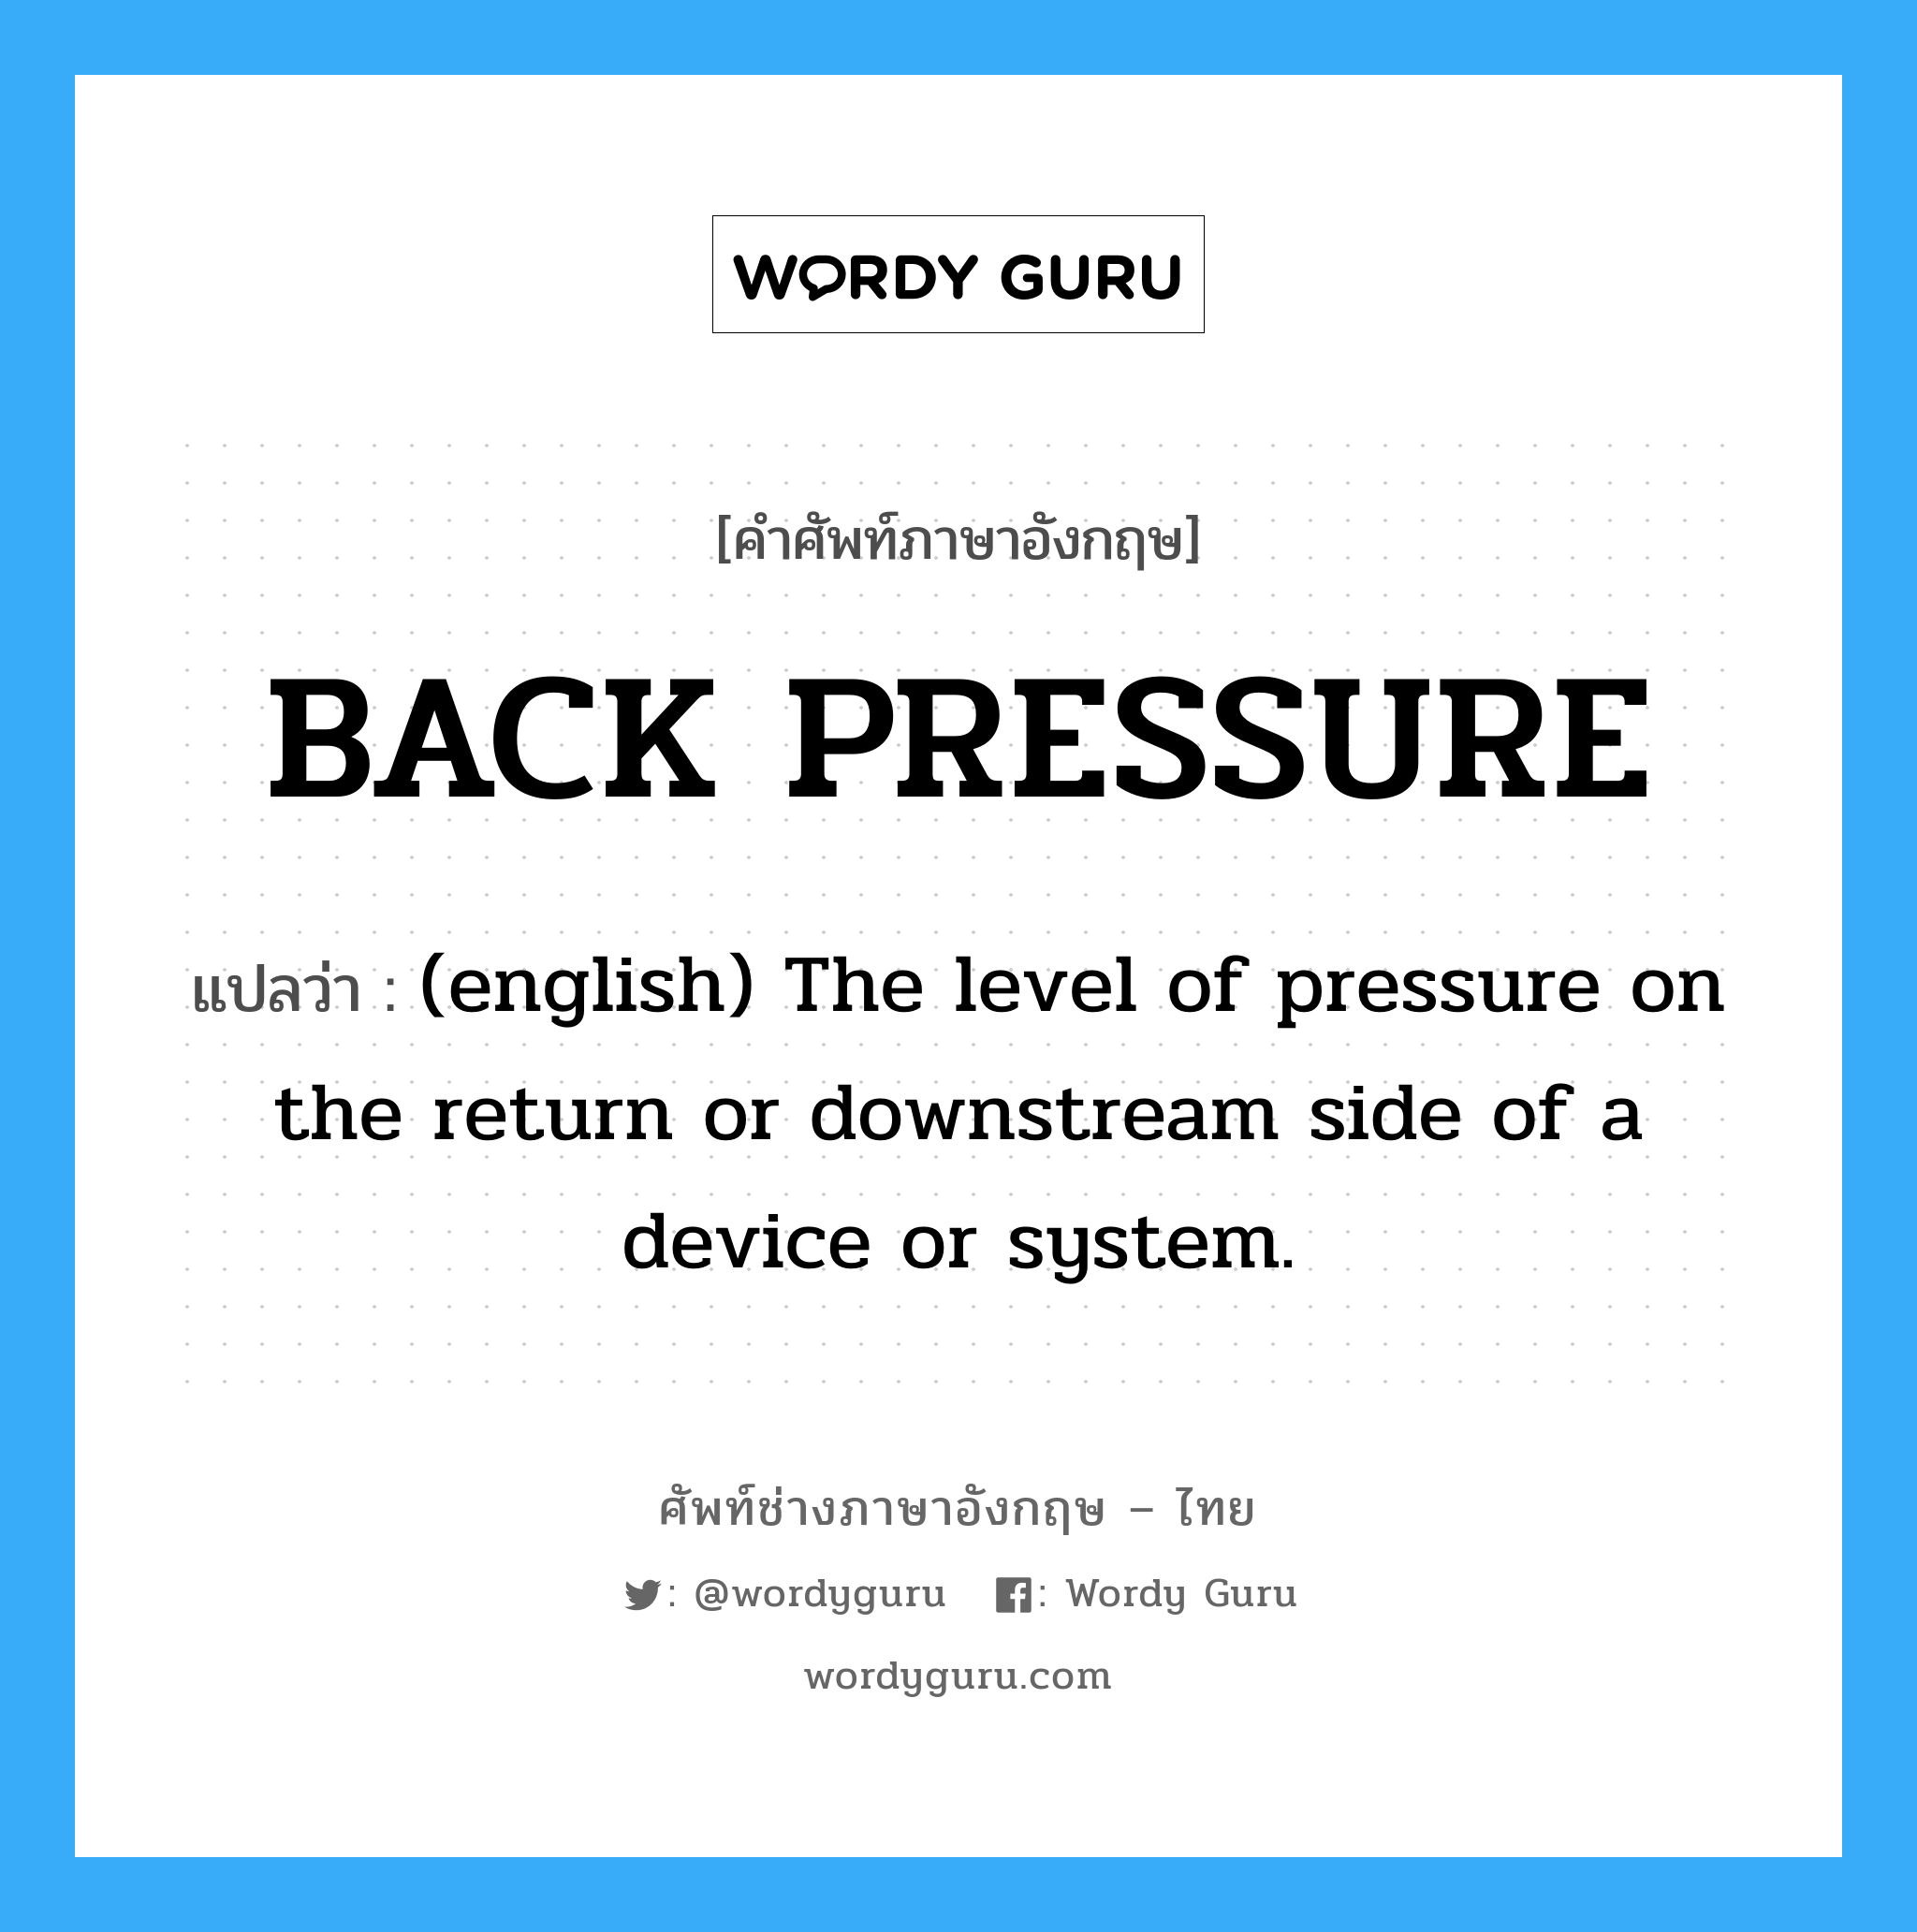 (english) The level of pressure on the return or downstream side of a device or system. ภาษาอังกฤษ?, คำศัพท์ช่างภาษาอังกฤษ - ไทย (english) The level of pressure on the return or downstream side of a device or system. คำศัพท์ภาษาอังกฤษ (english) The level of pressure on the return or downstream side of a device or system. แปลว่า BACK PRESSURE